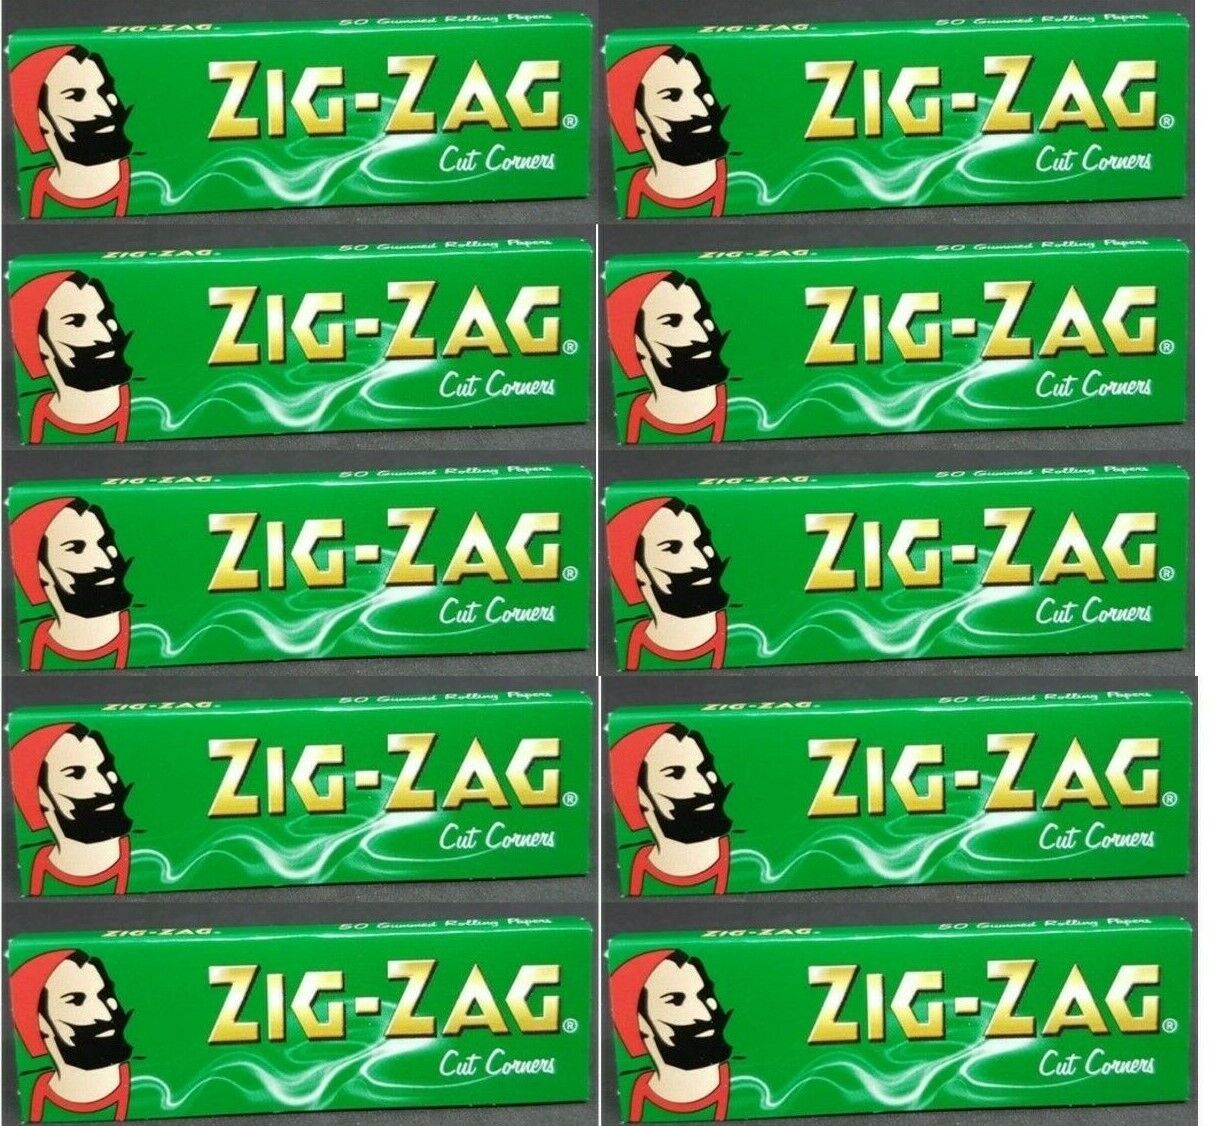 10 PACKS Zig Zag Green Rolling Papers Cut Corners *Best Price* *USA SHIPPED*